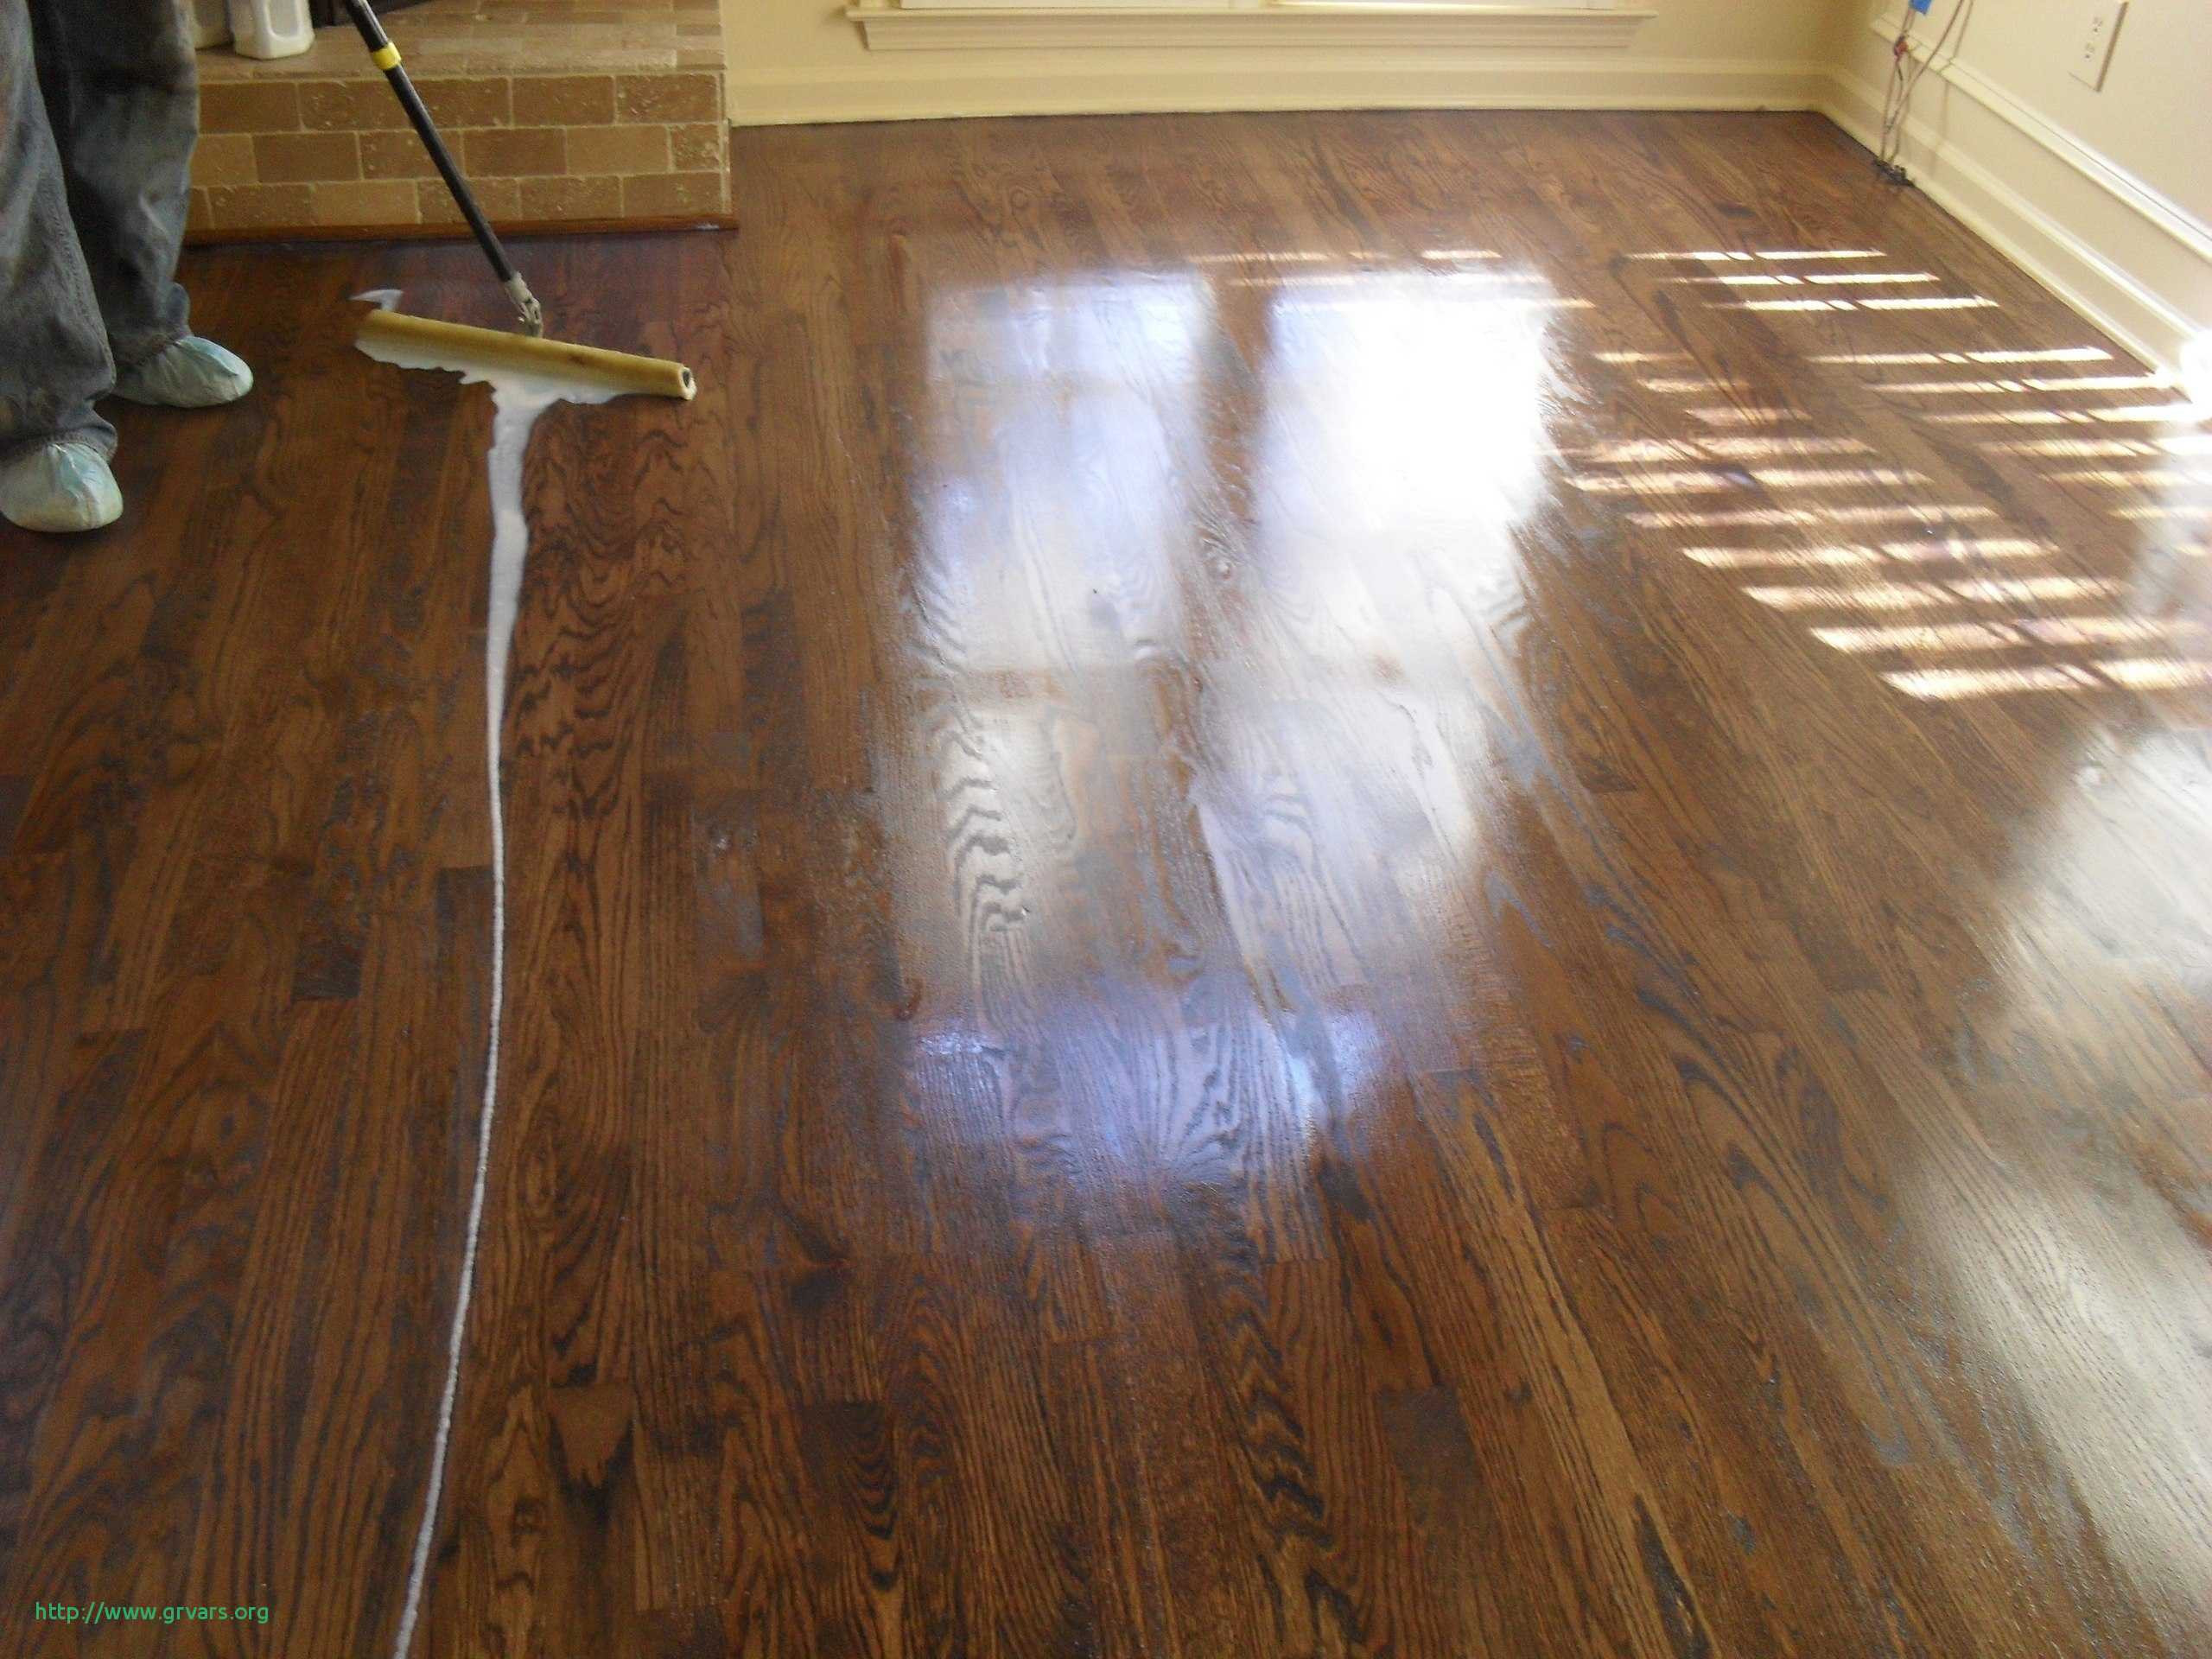 16 Spectacular How to Finish Hardwood Floors 2022 free download how to finish hardwood floors of image number 6563 from post restoring old hardwood floors will with regard to nouveau hardwood floors yourself ideas restoring old will inspirant redo withou